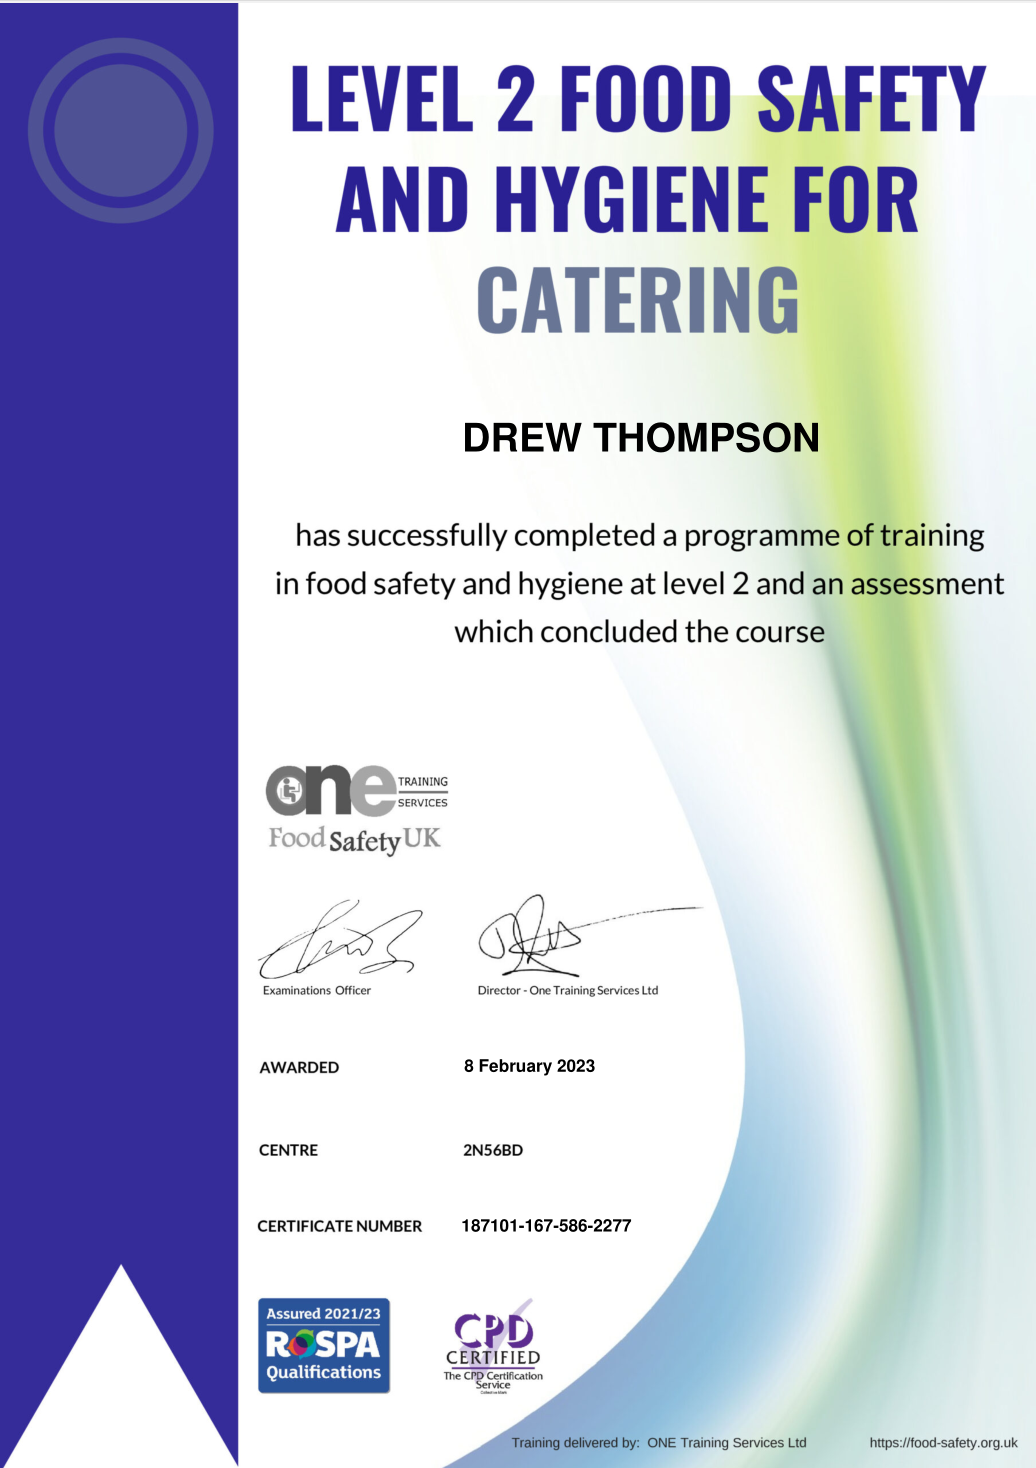 I have passed my Level 2 Food Safety and Hygiene for Catering